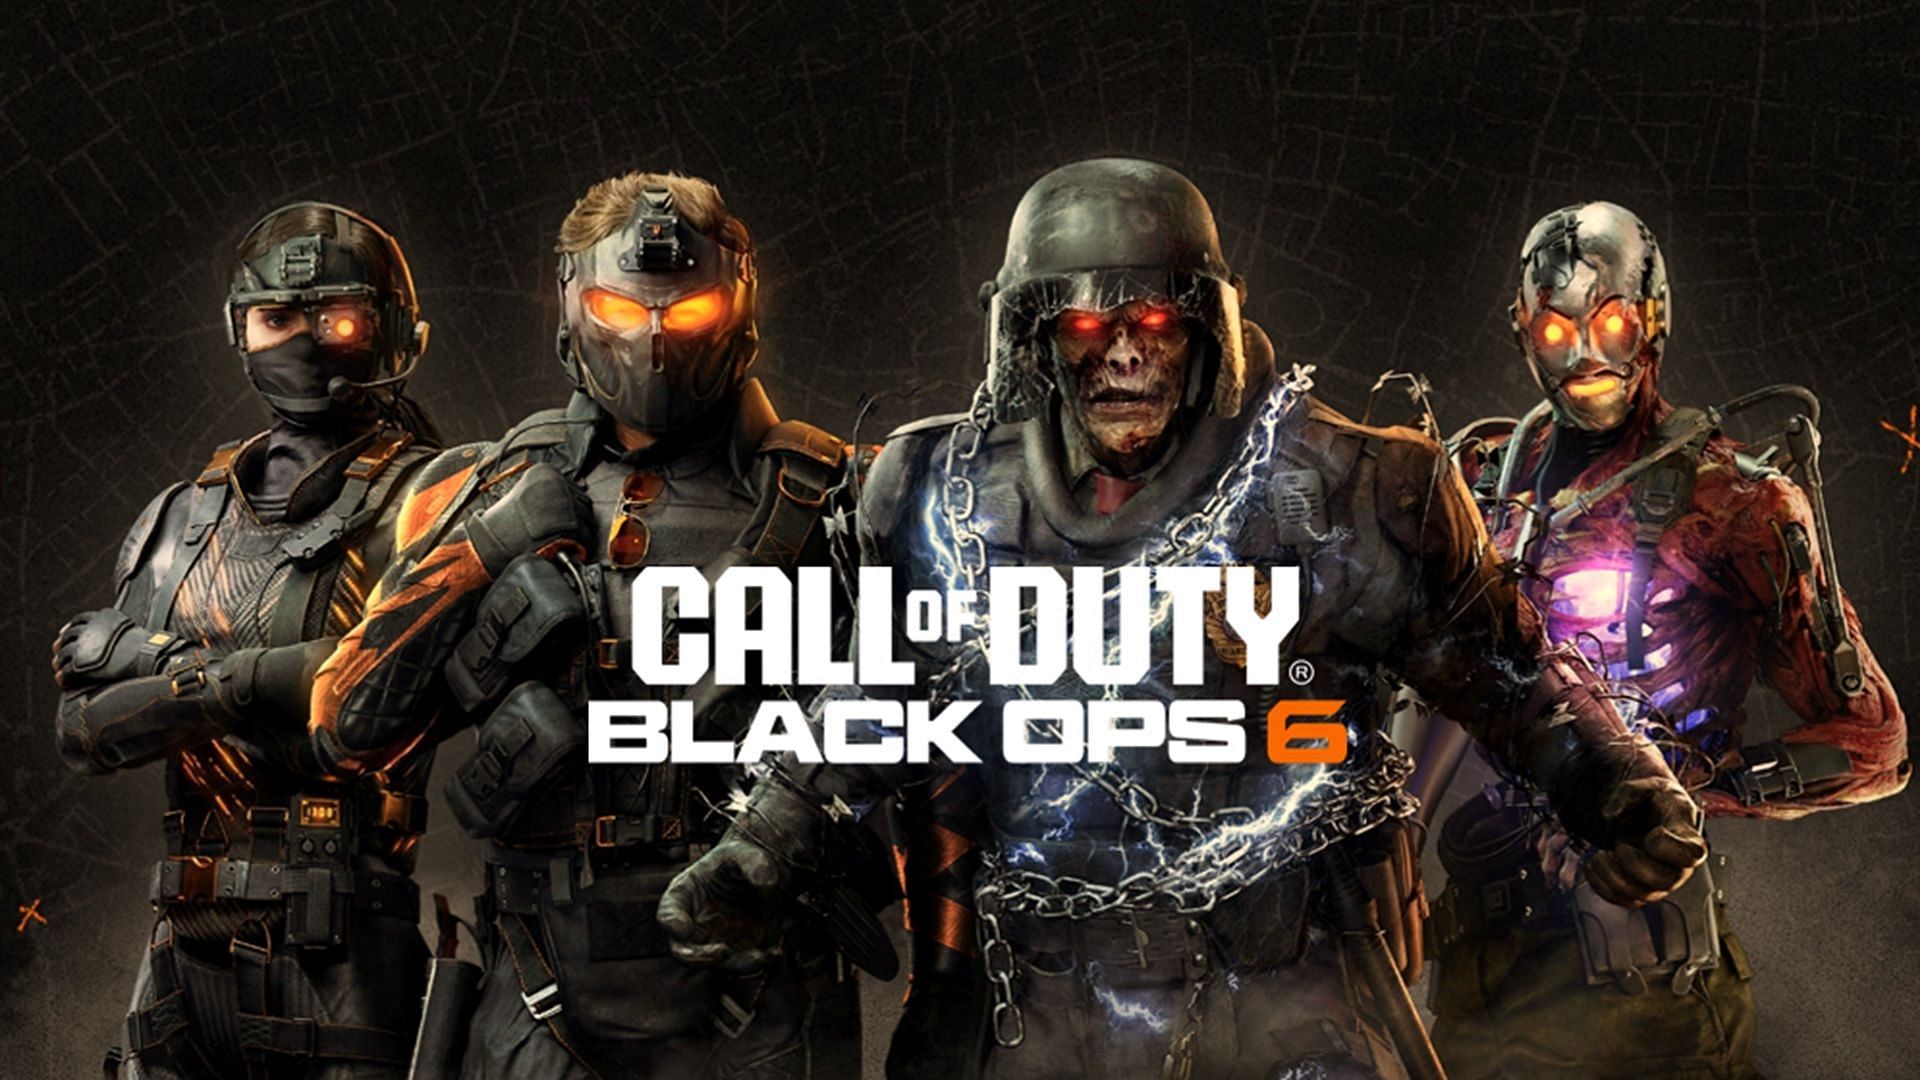 CoD Black Ops 6 is currently available to wishlist for PC and Xbox platforms